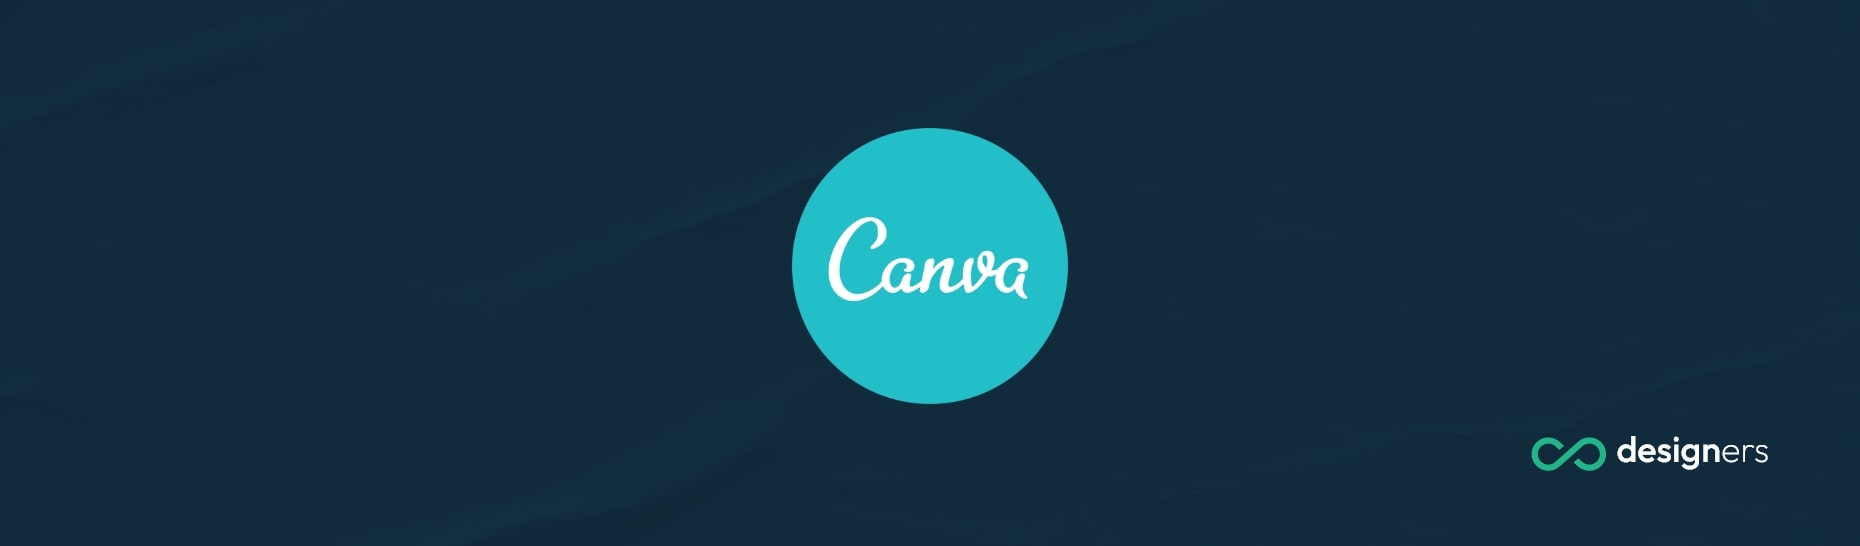 Is Canva a Virus?